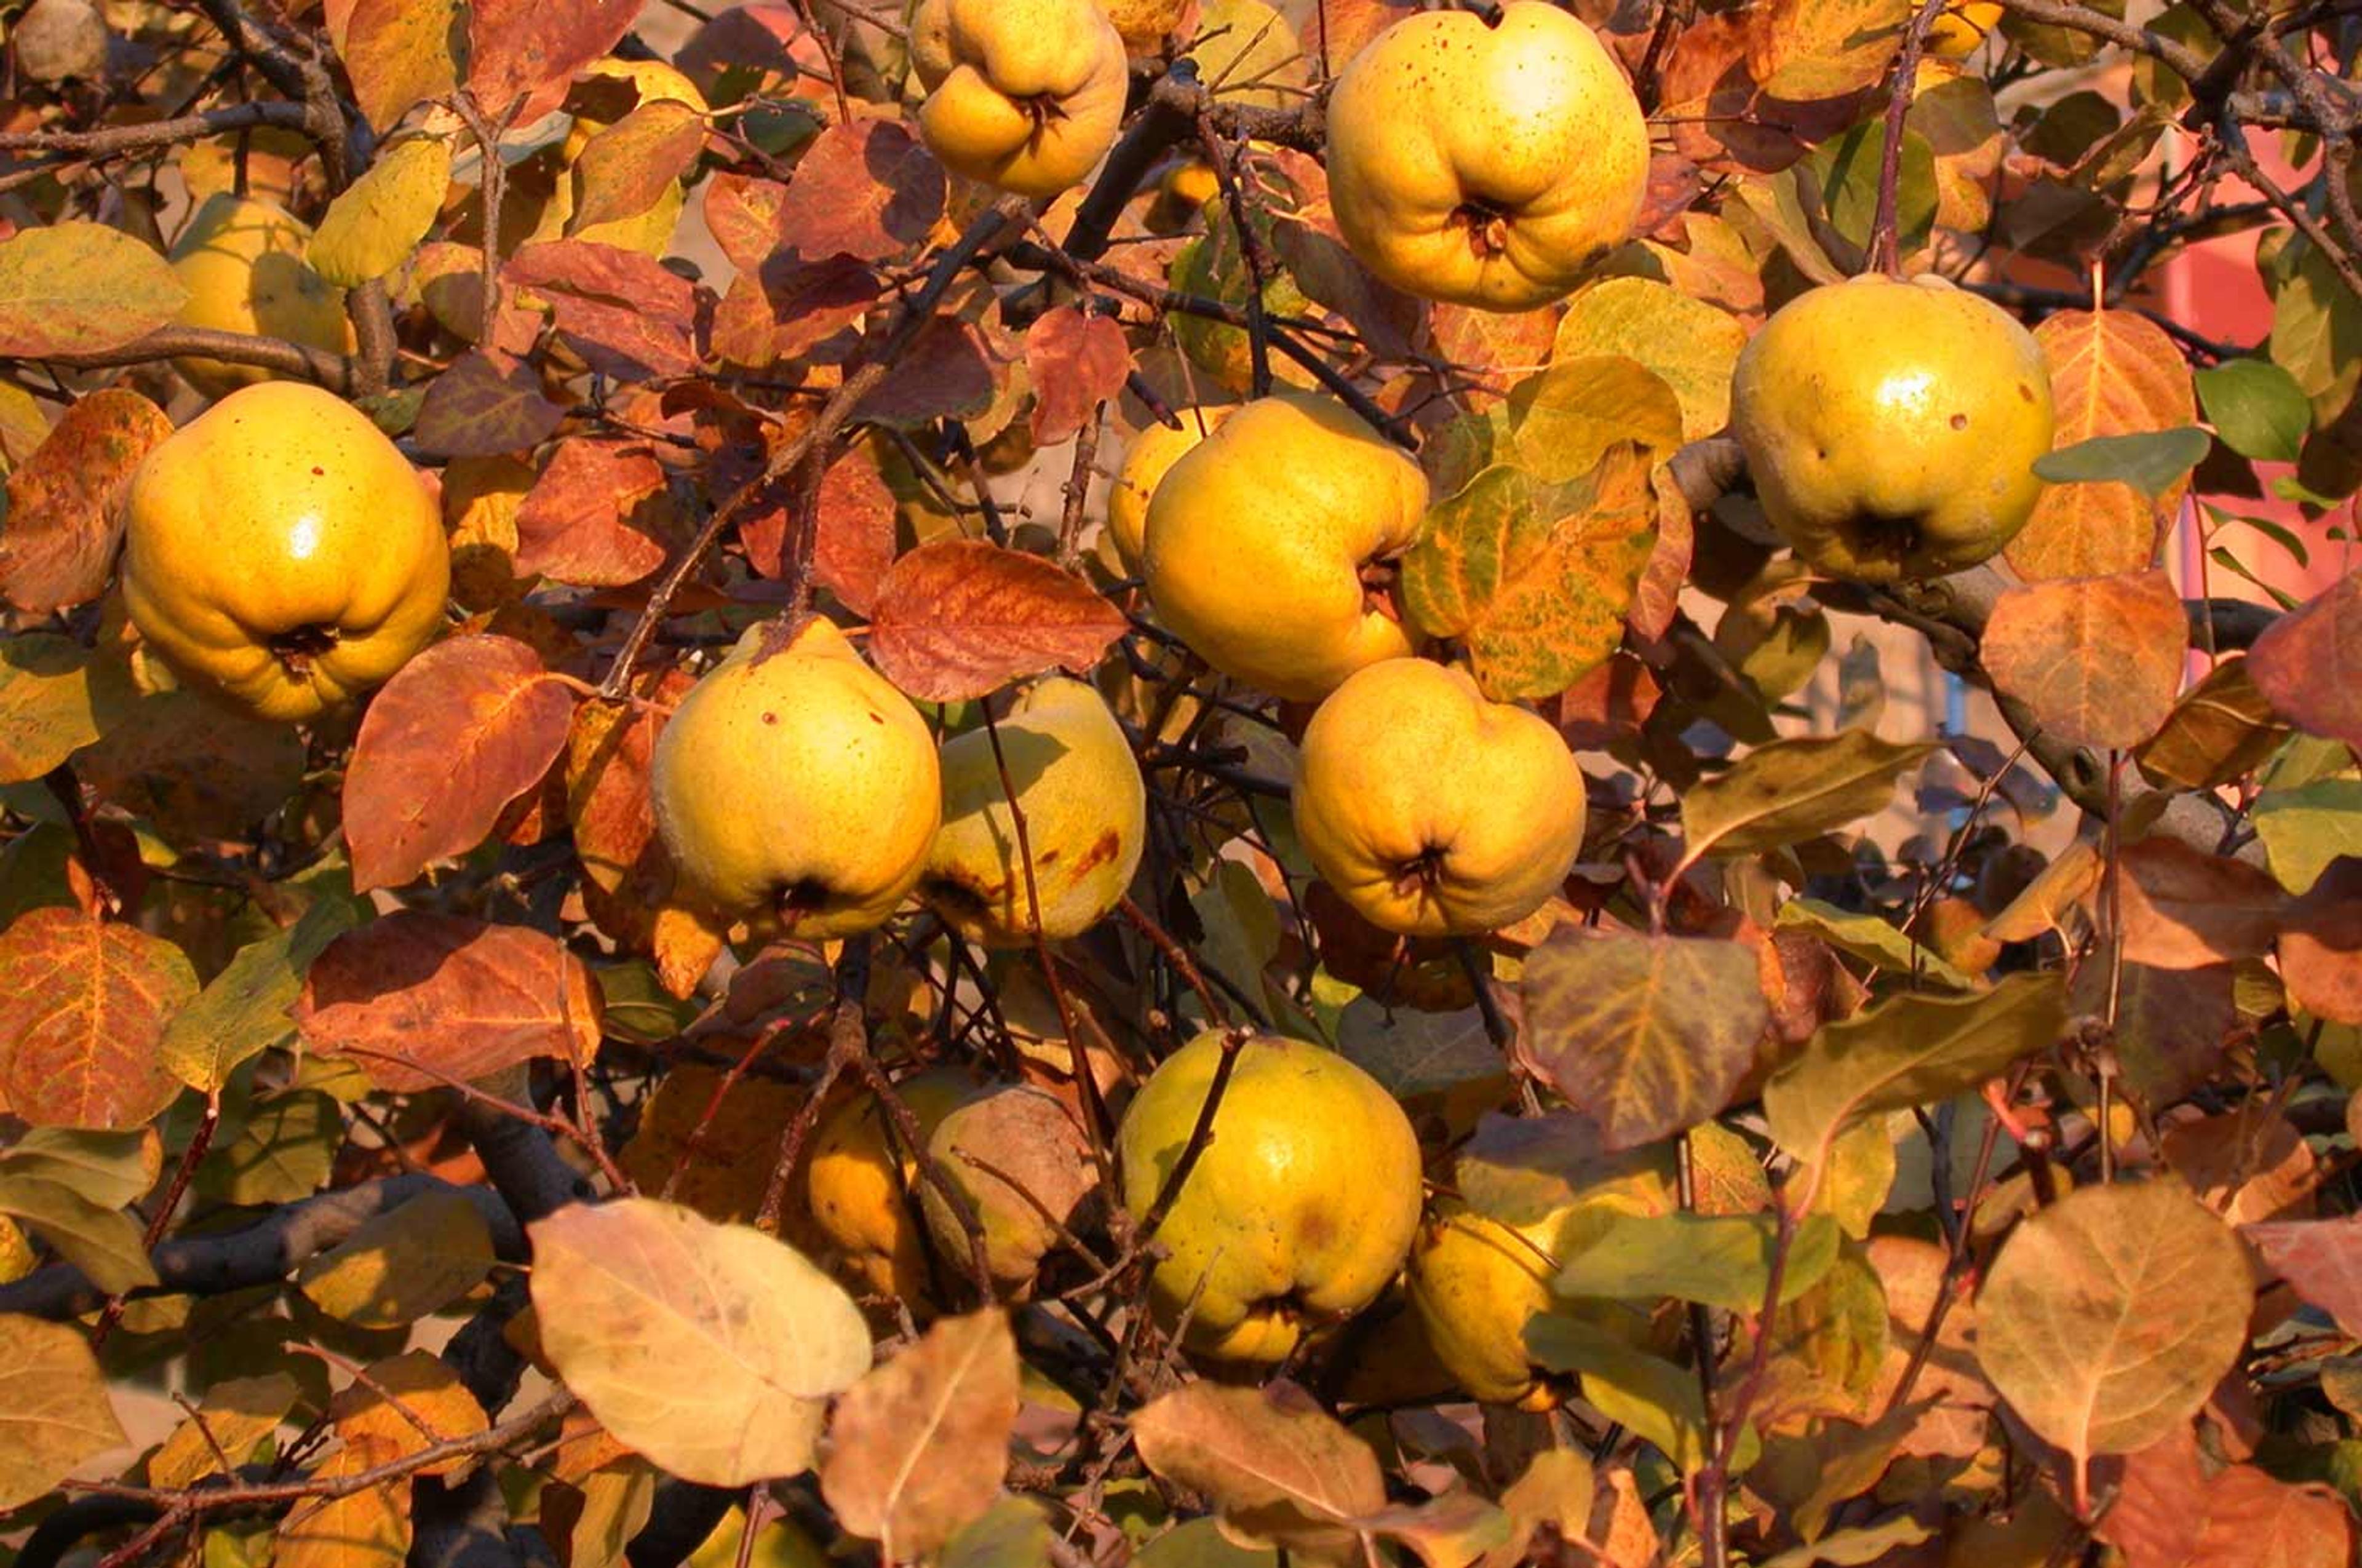 Close-up on a quince tree with ripe yellow fruit and yellow, orange, red, and brown leaves